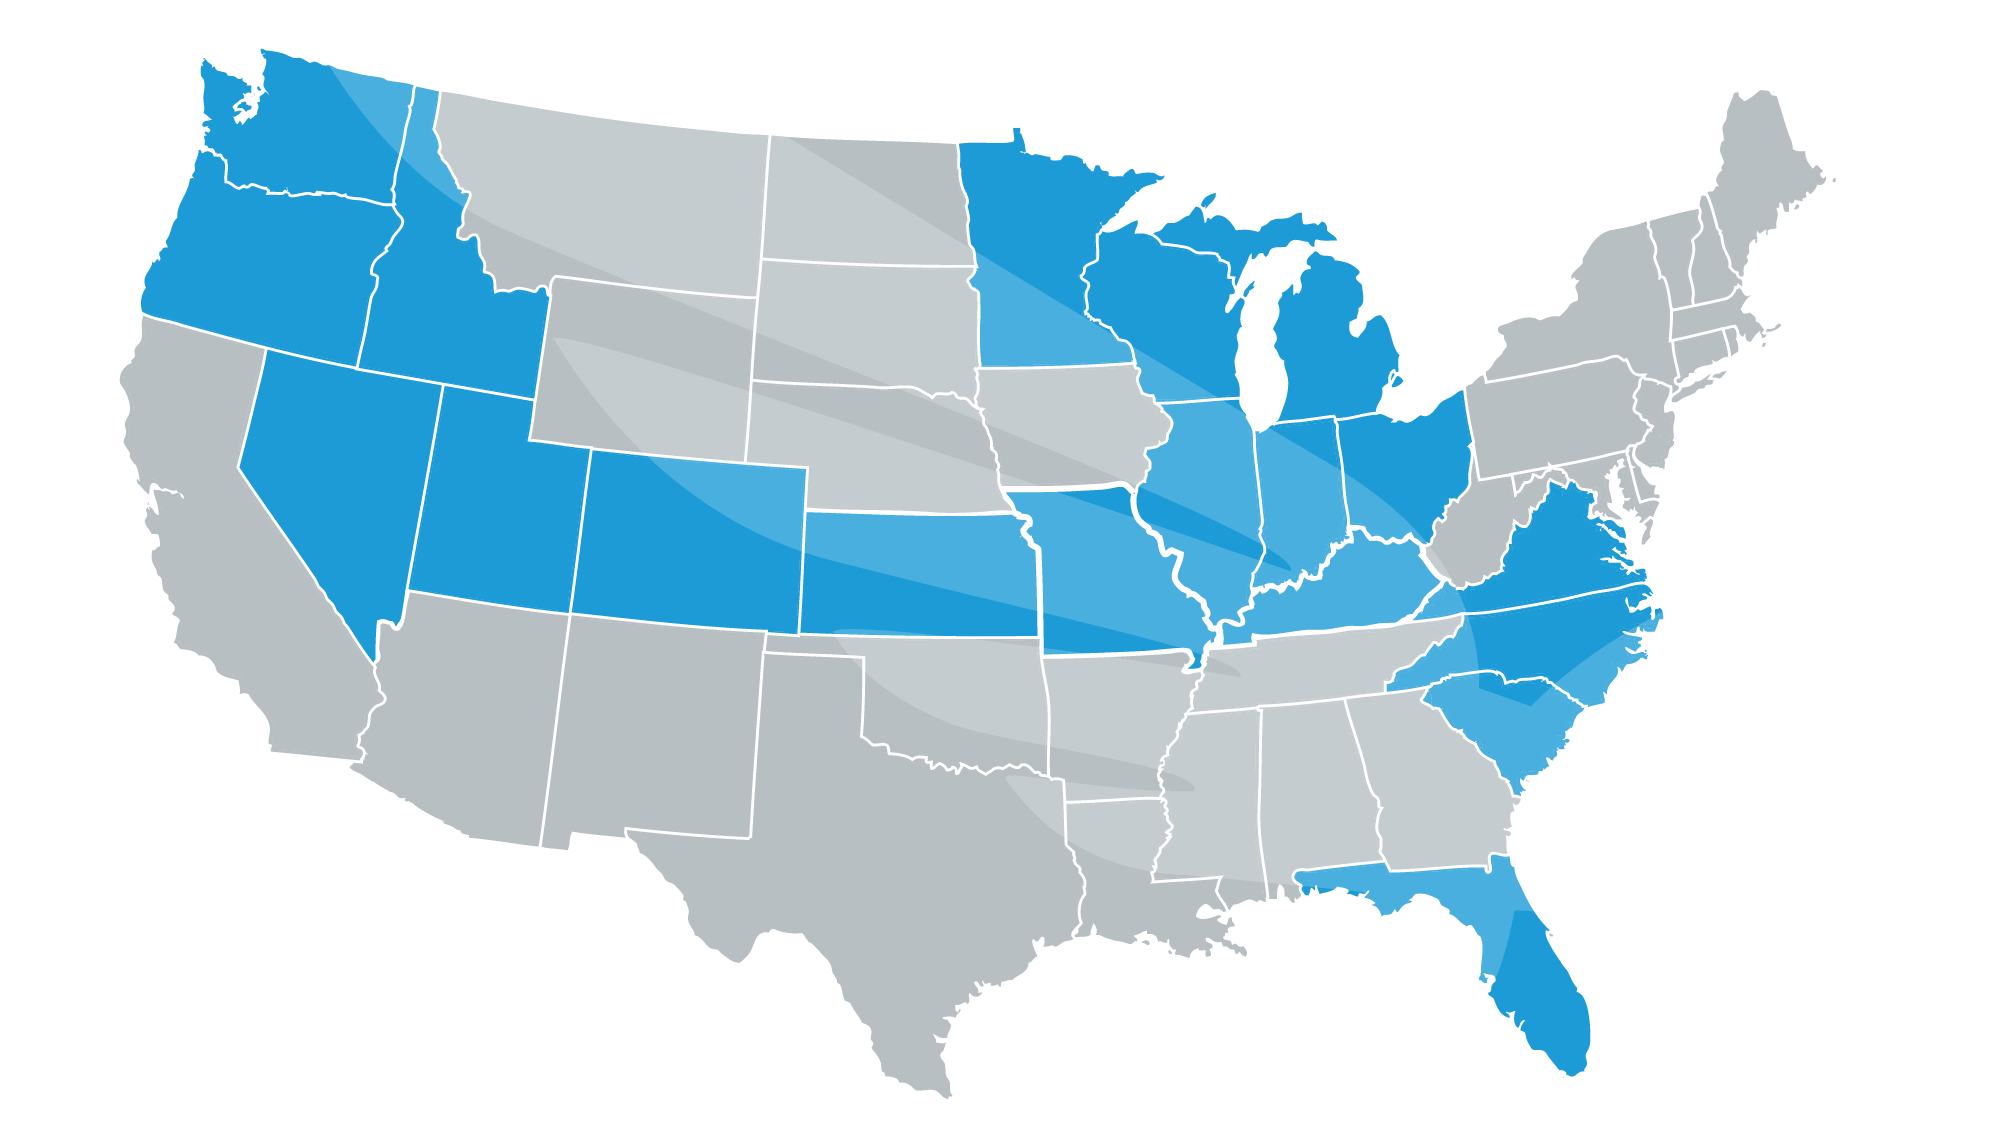 Map of the United States of America, indicating Blue Raven Solar service areas and locations in blue